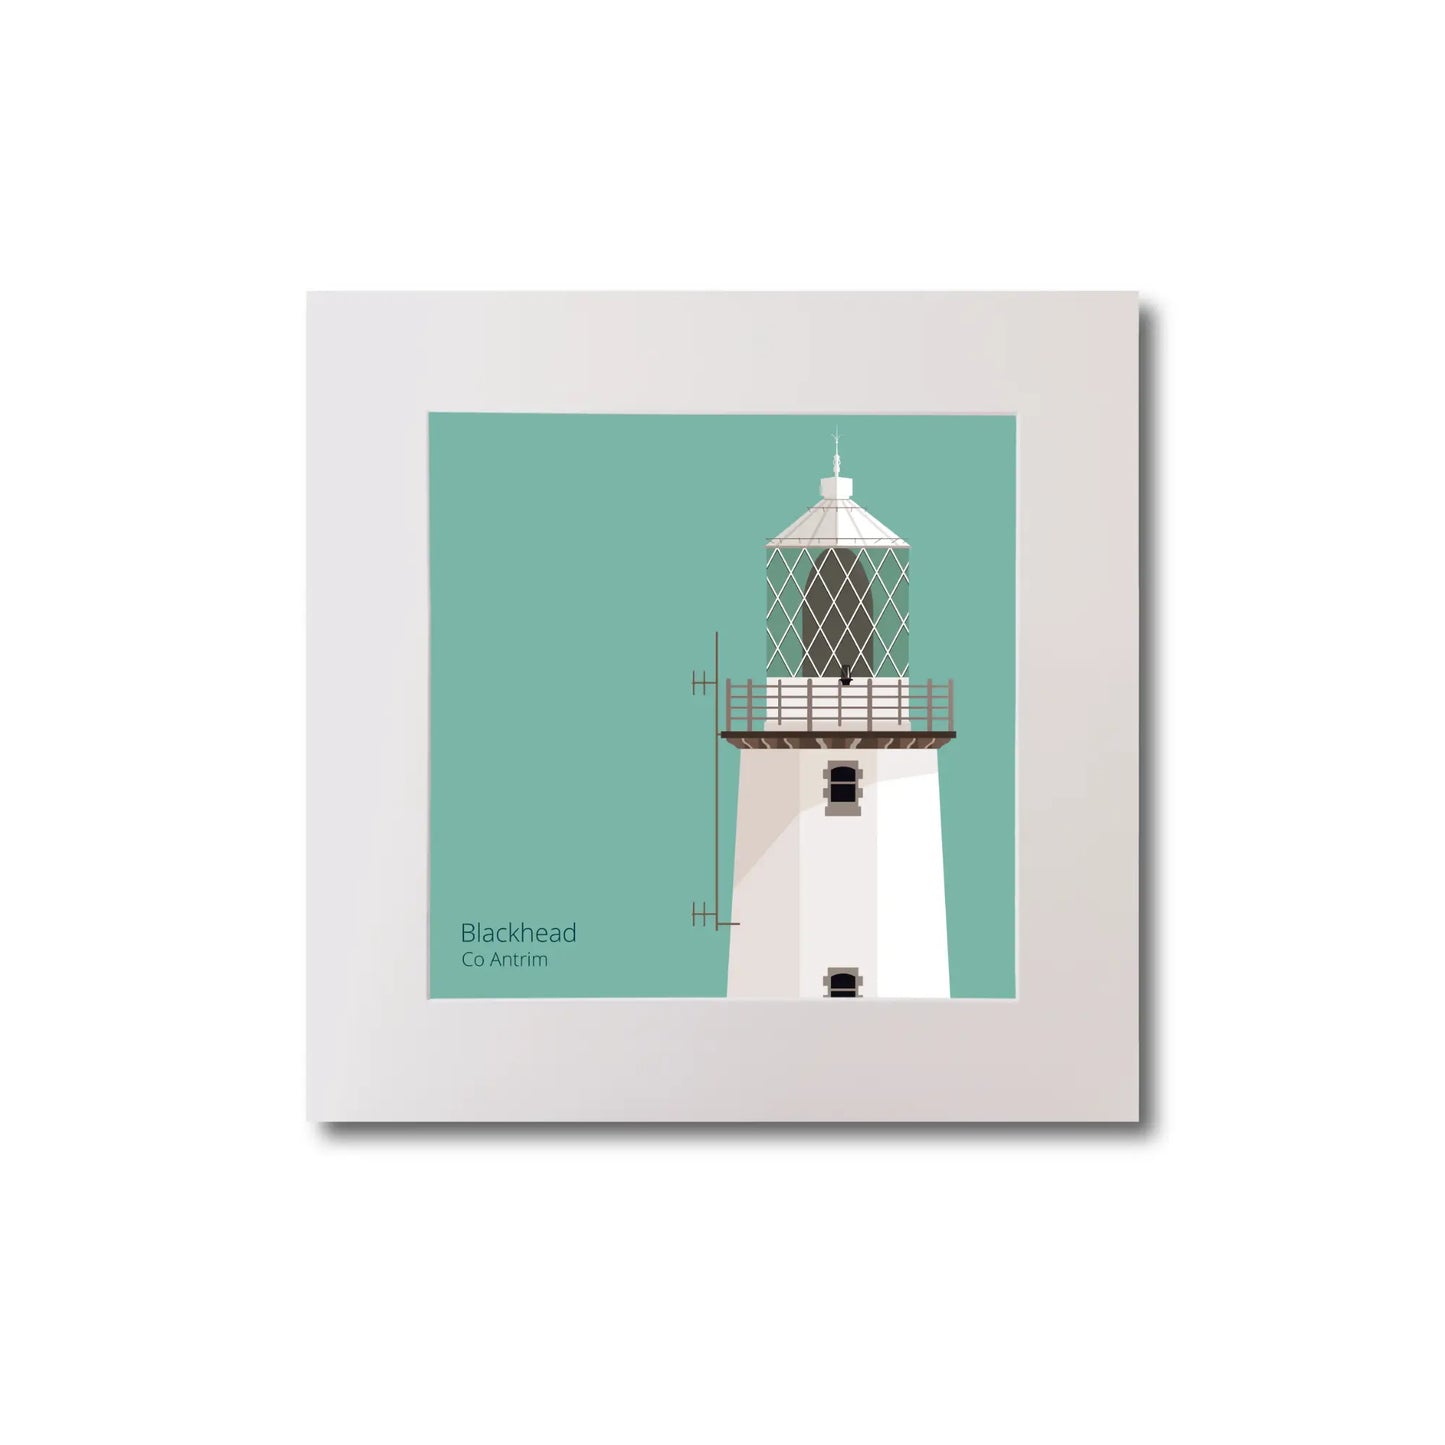 Illustration of Blackhead lighthouse on an ocean green background, mounted and measuring 20x20cm.